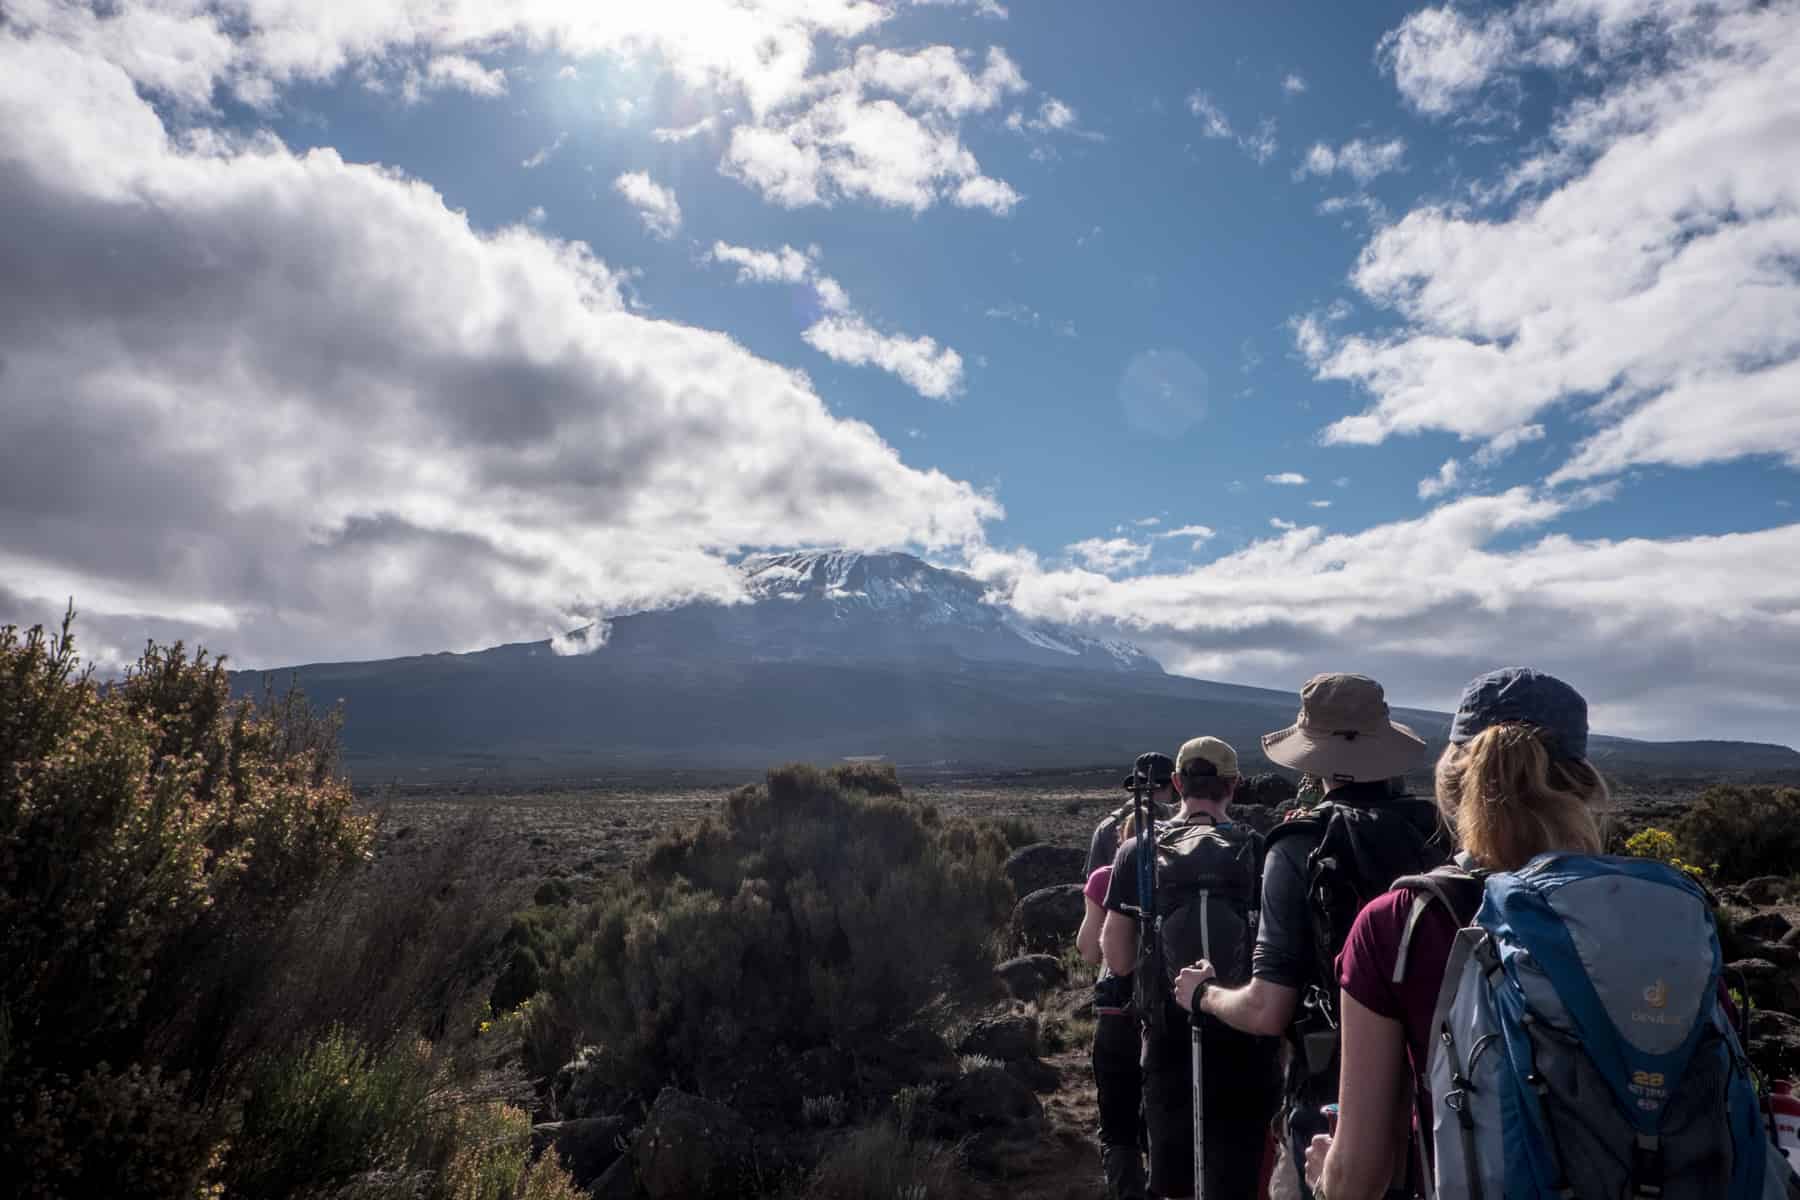 A small trekking group climbing Kilimanjaro moorland with a view of the snow-capped Kibo Peak ahead.